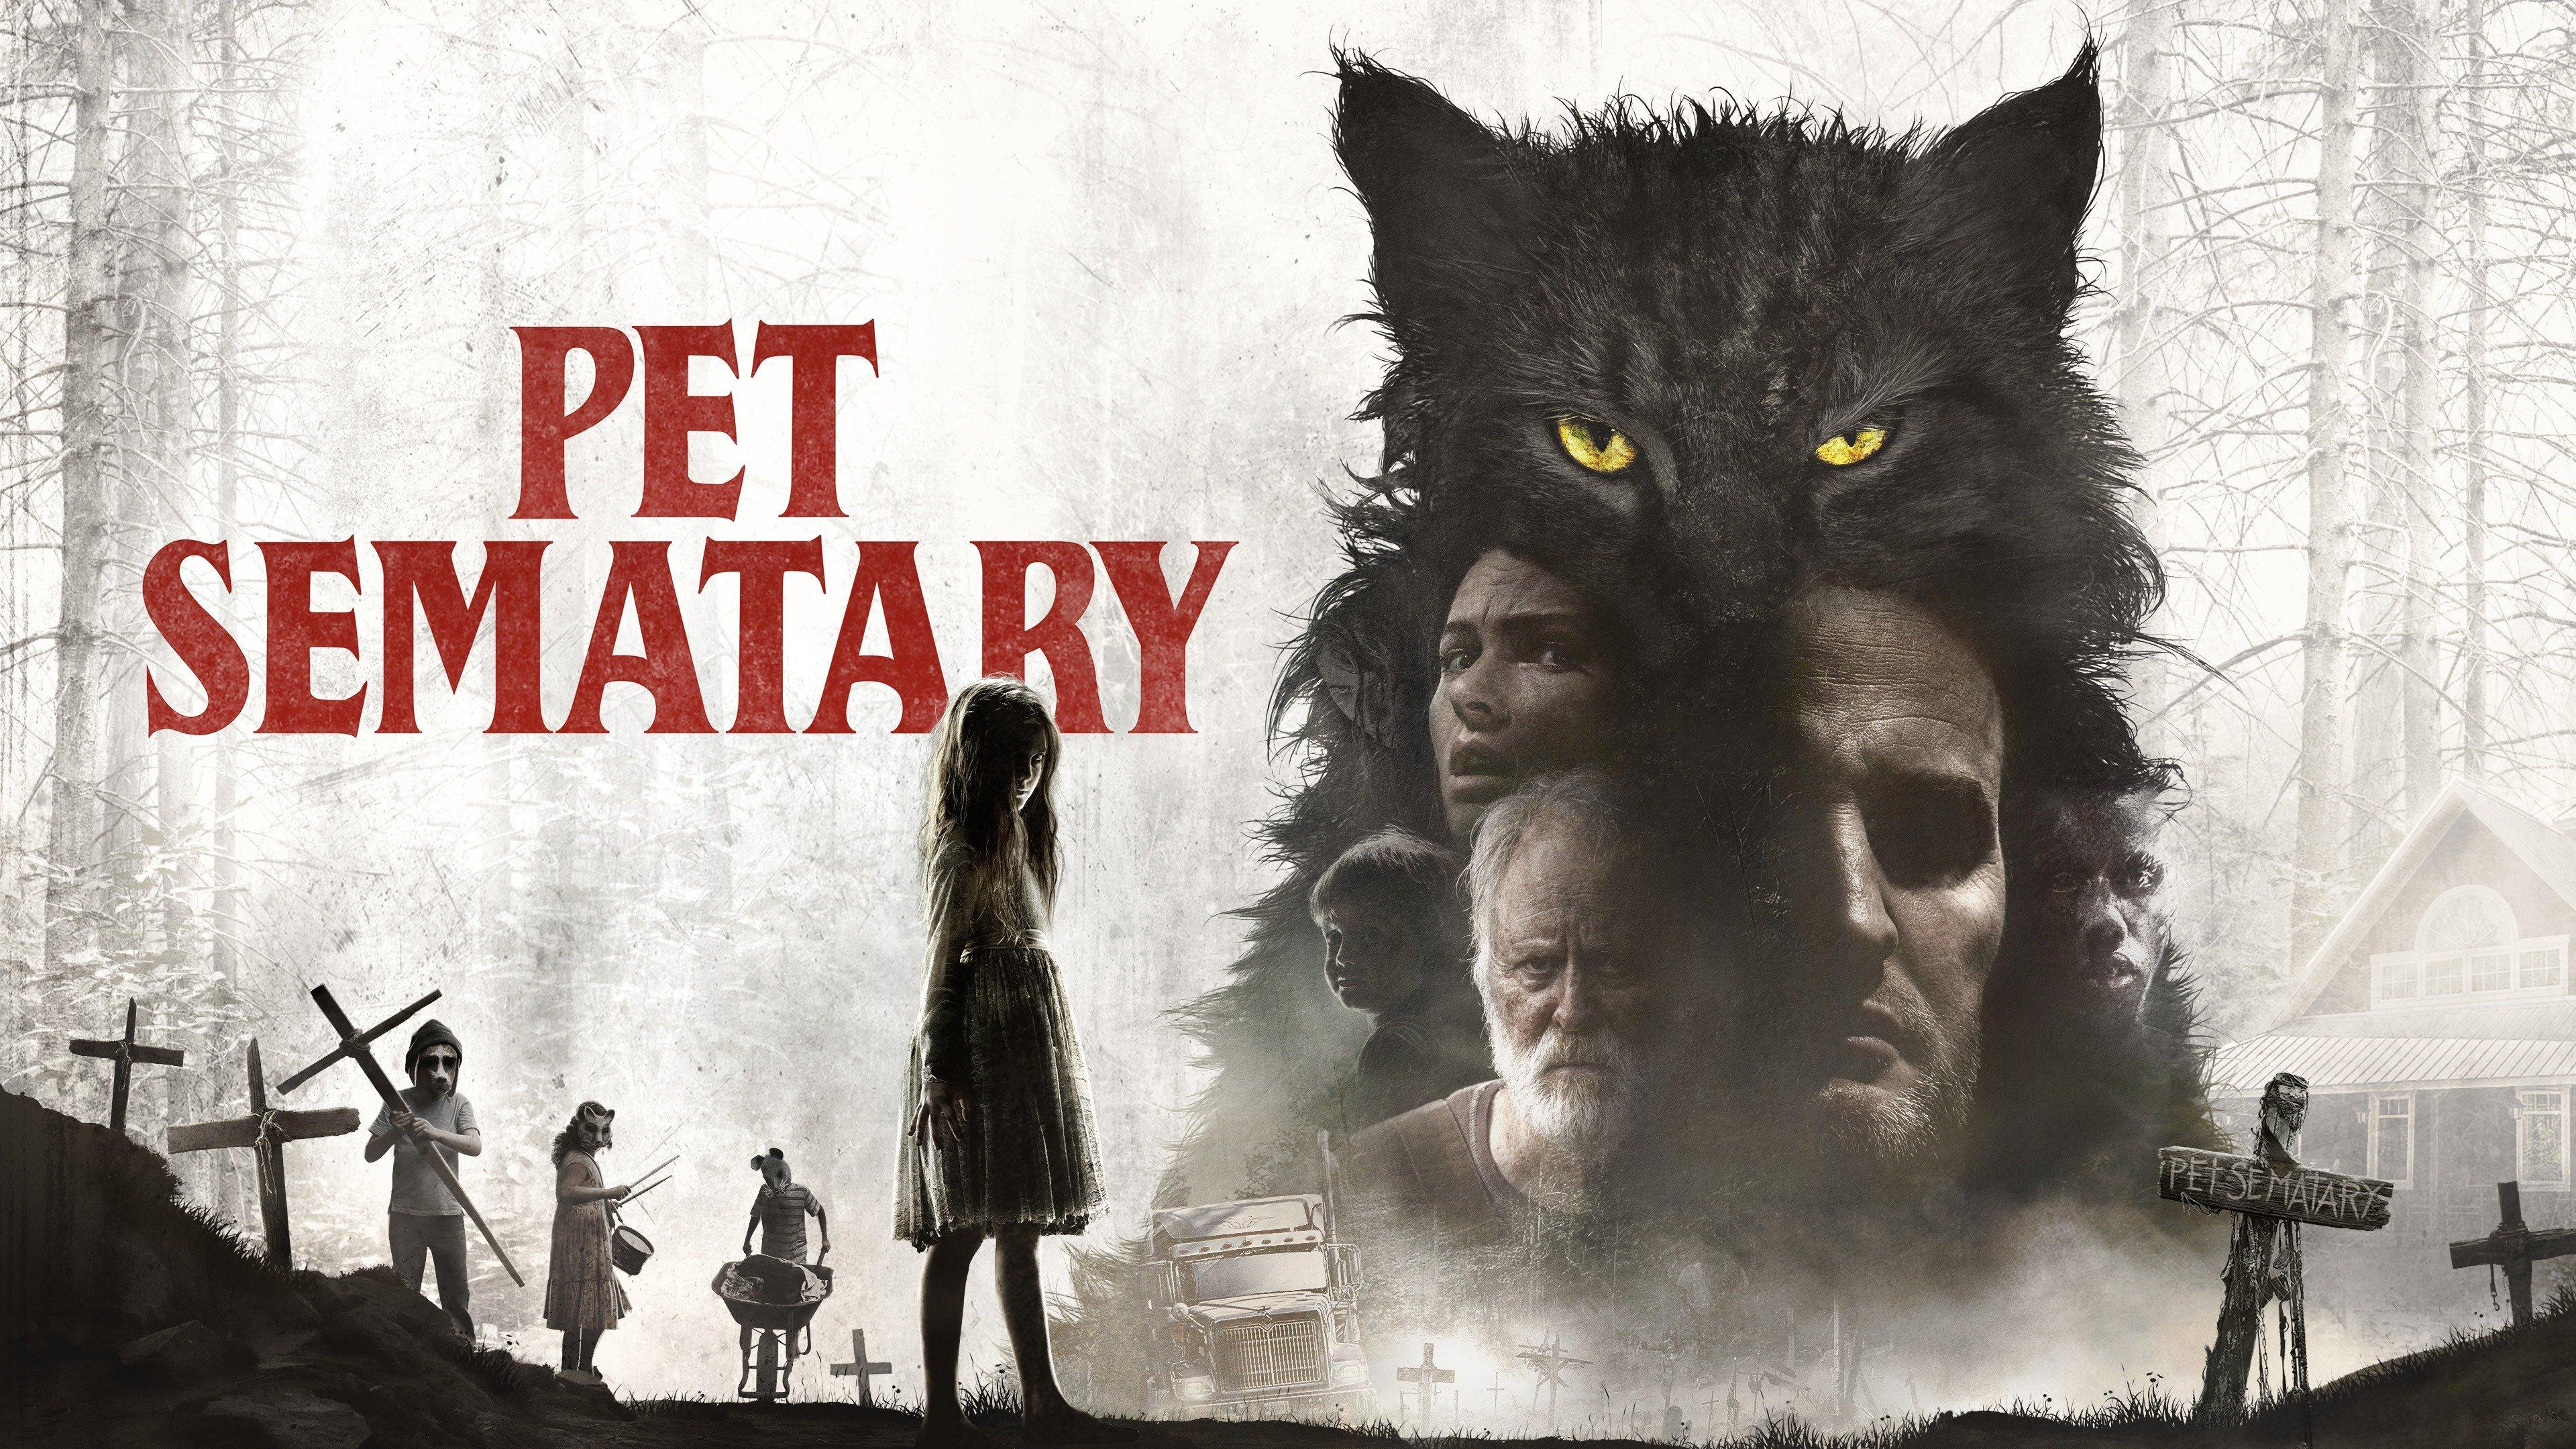 Watch Pet Sematary Streaming Online on Philo (Free Trial)